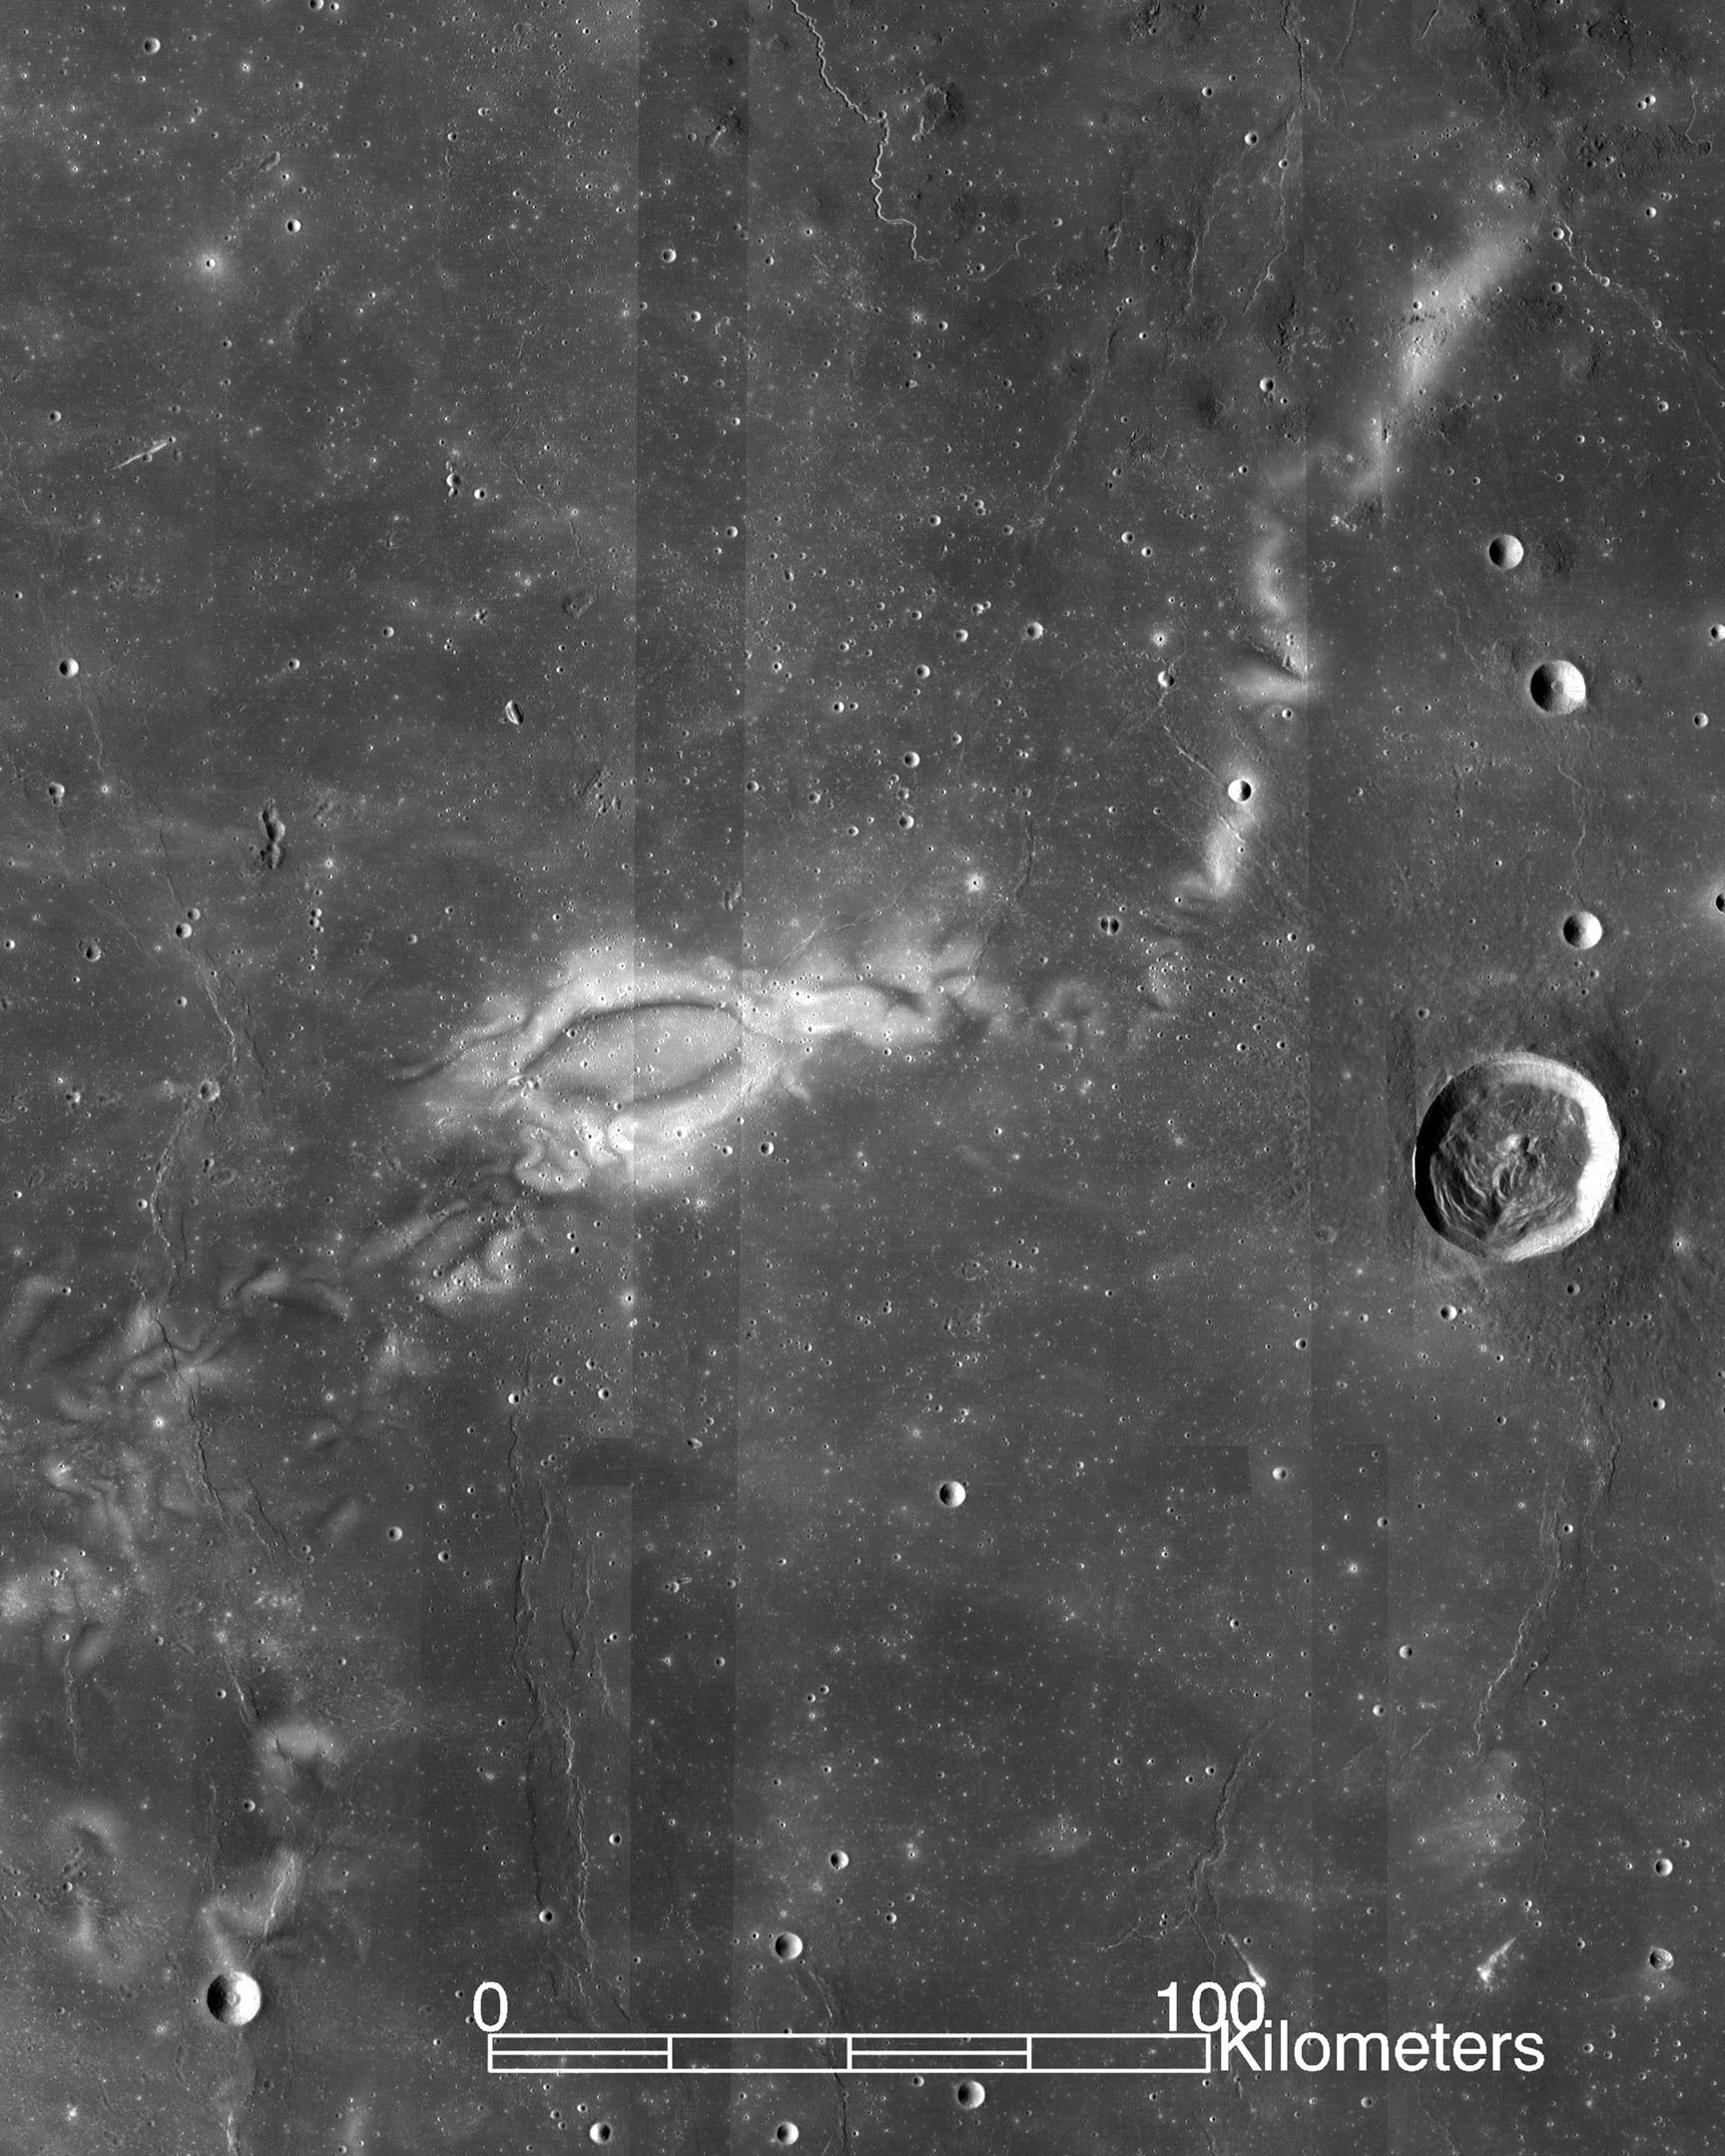 Lunar swirls are strange markings on the moon that a conceptual CubeSat mission would study. 